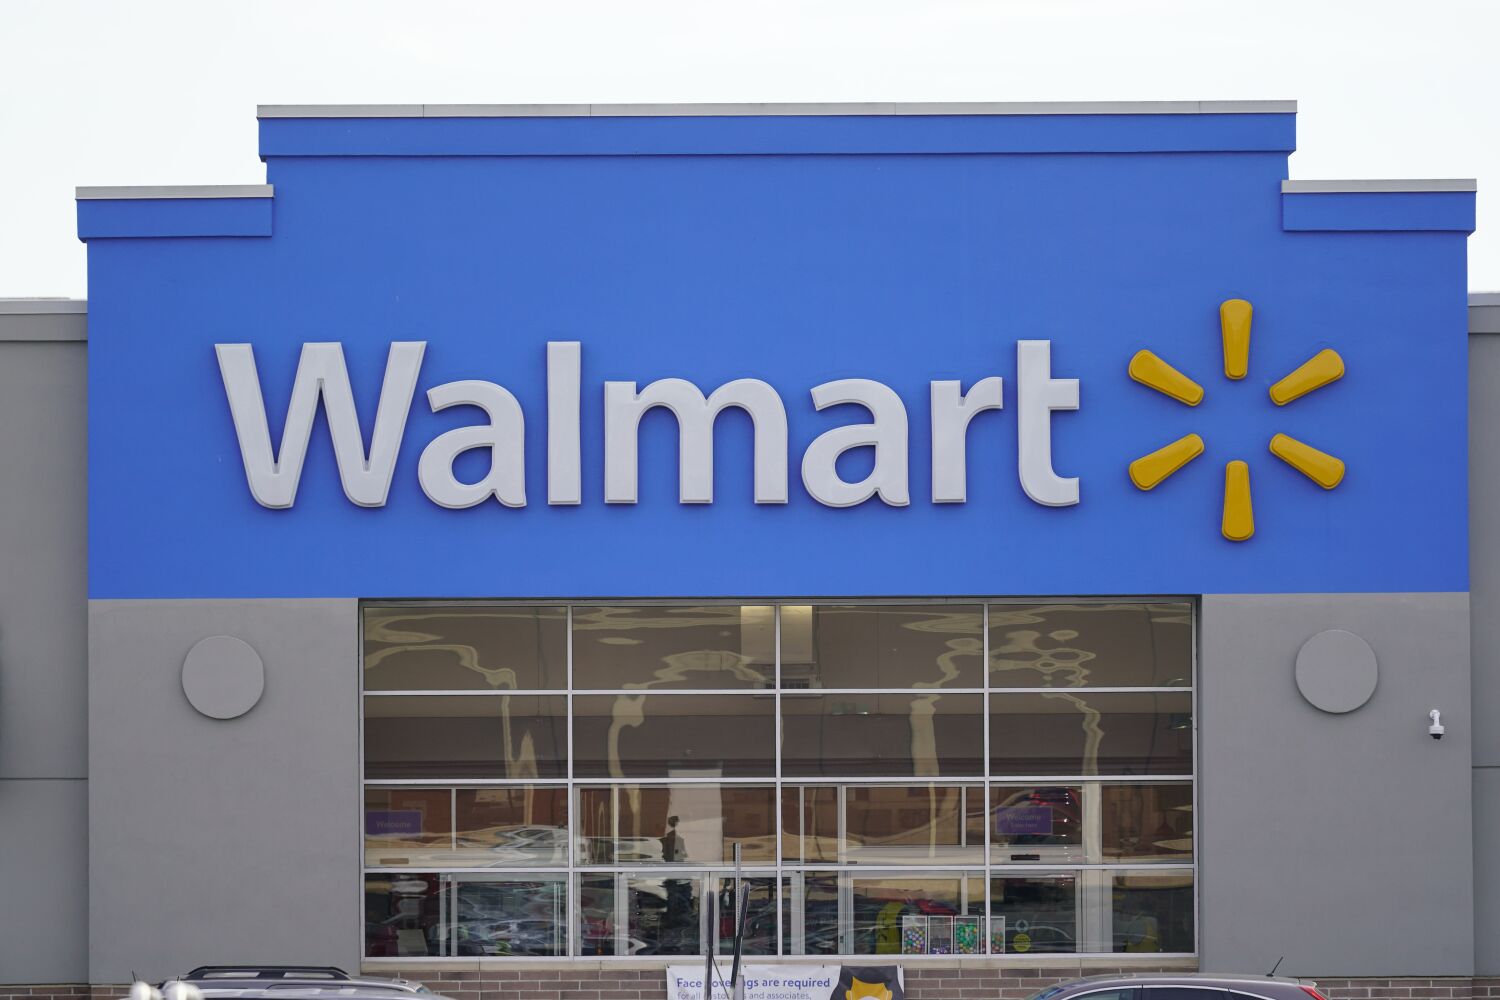 Walmart illegally sold brass knuckles to Californians. Now it will pay $500,000 fine